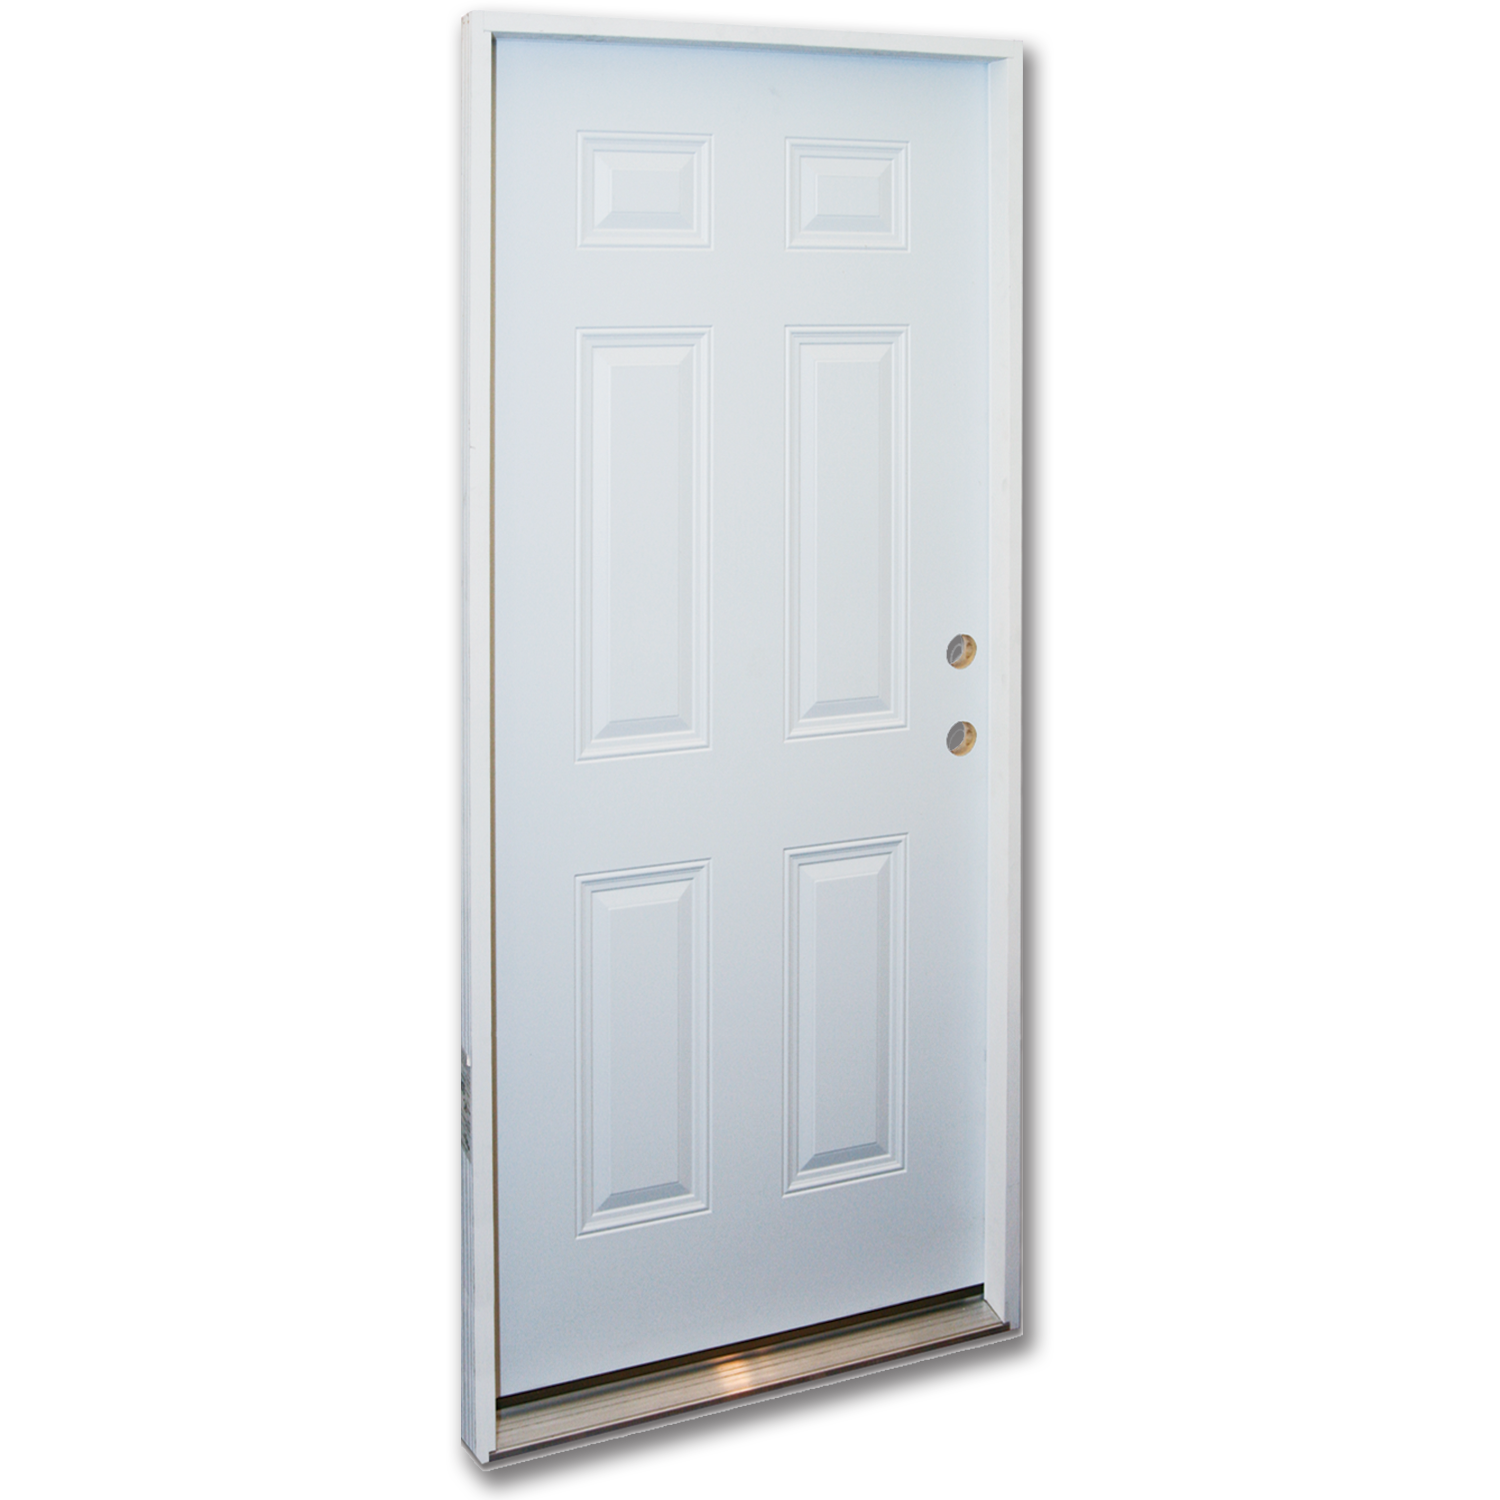 How To Replace Broken Plastic Threshold On Prehung Exterior Doors The